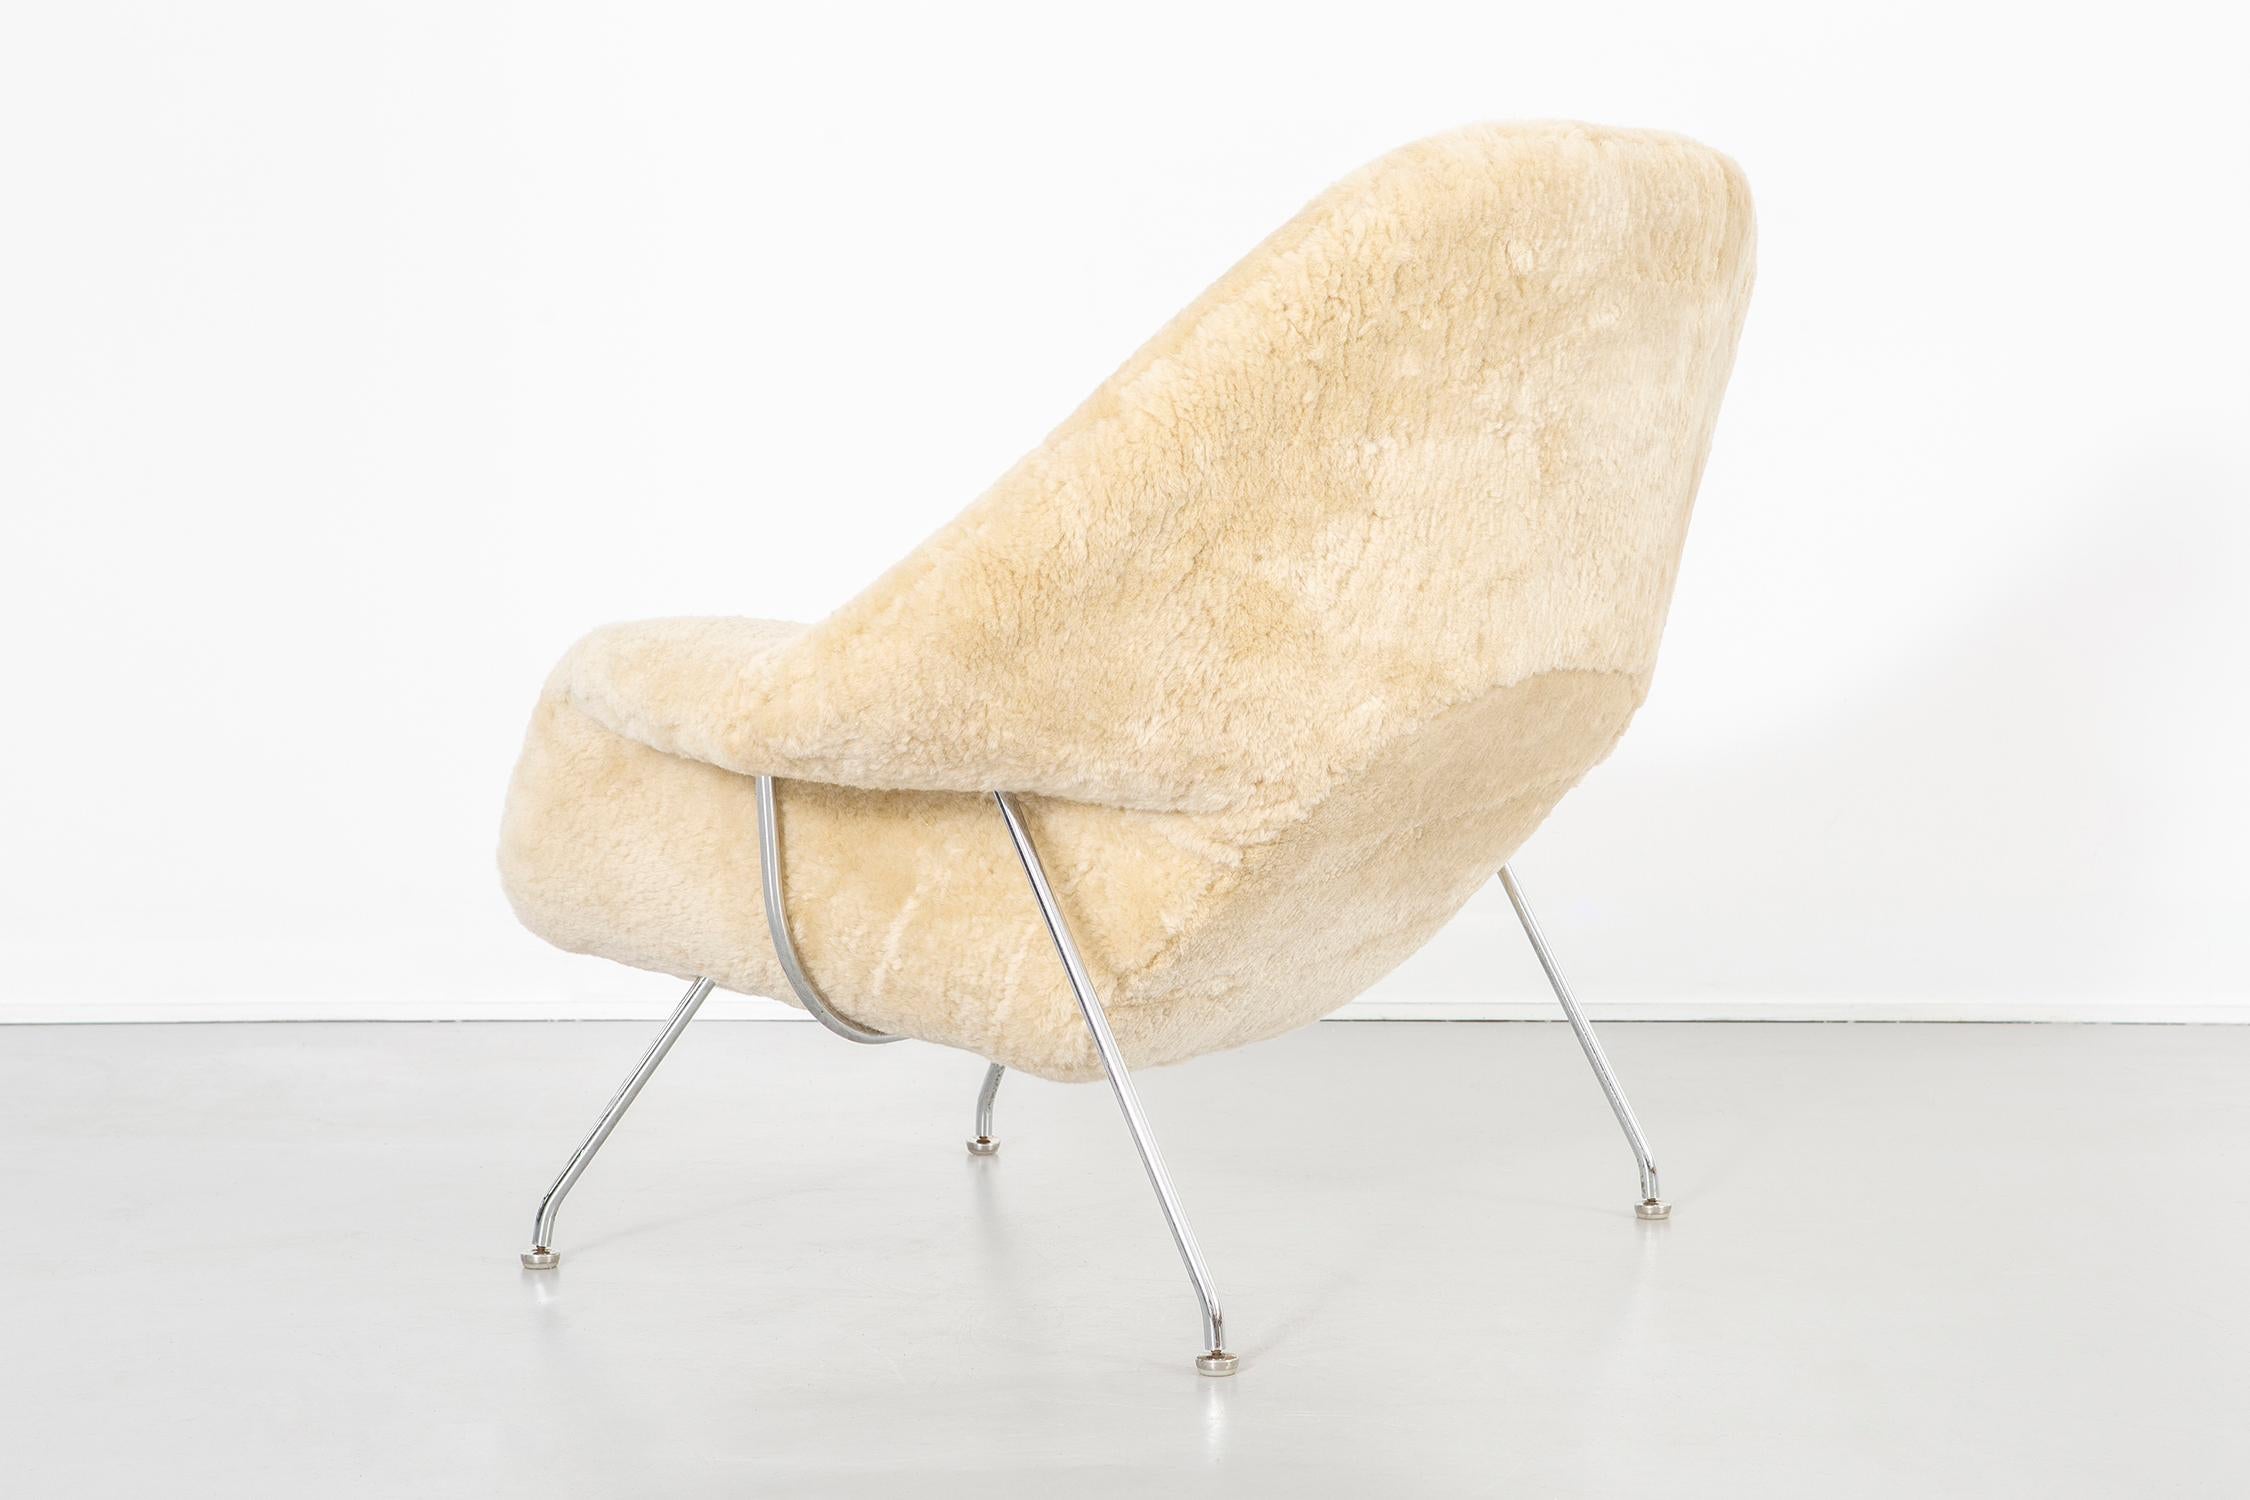 Mid-20th Century Mid-Century Modern Eero Saarinen for Knoll Womb Chair Reupholstered in Shearling For Sale